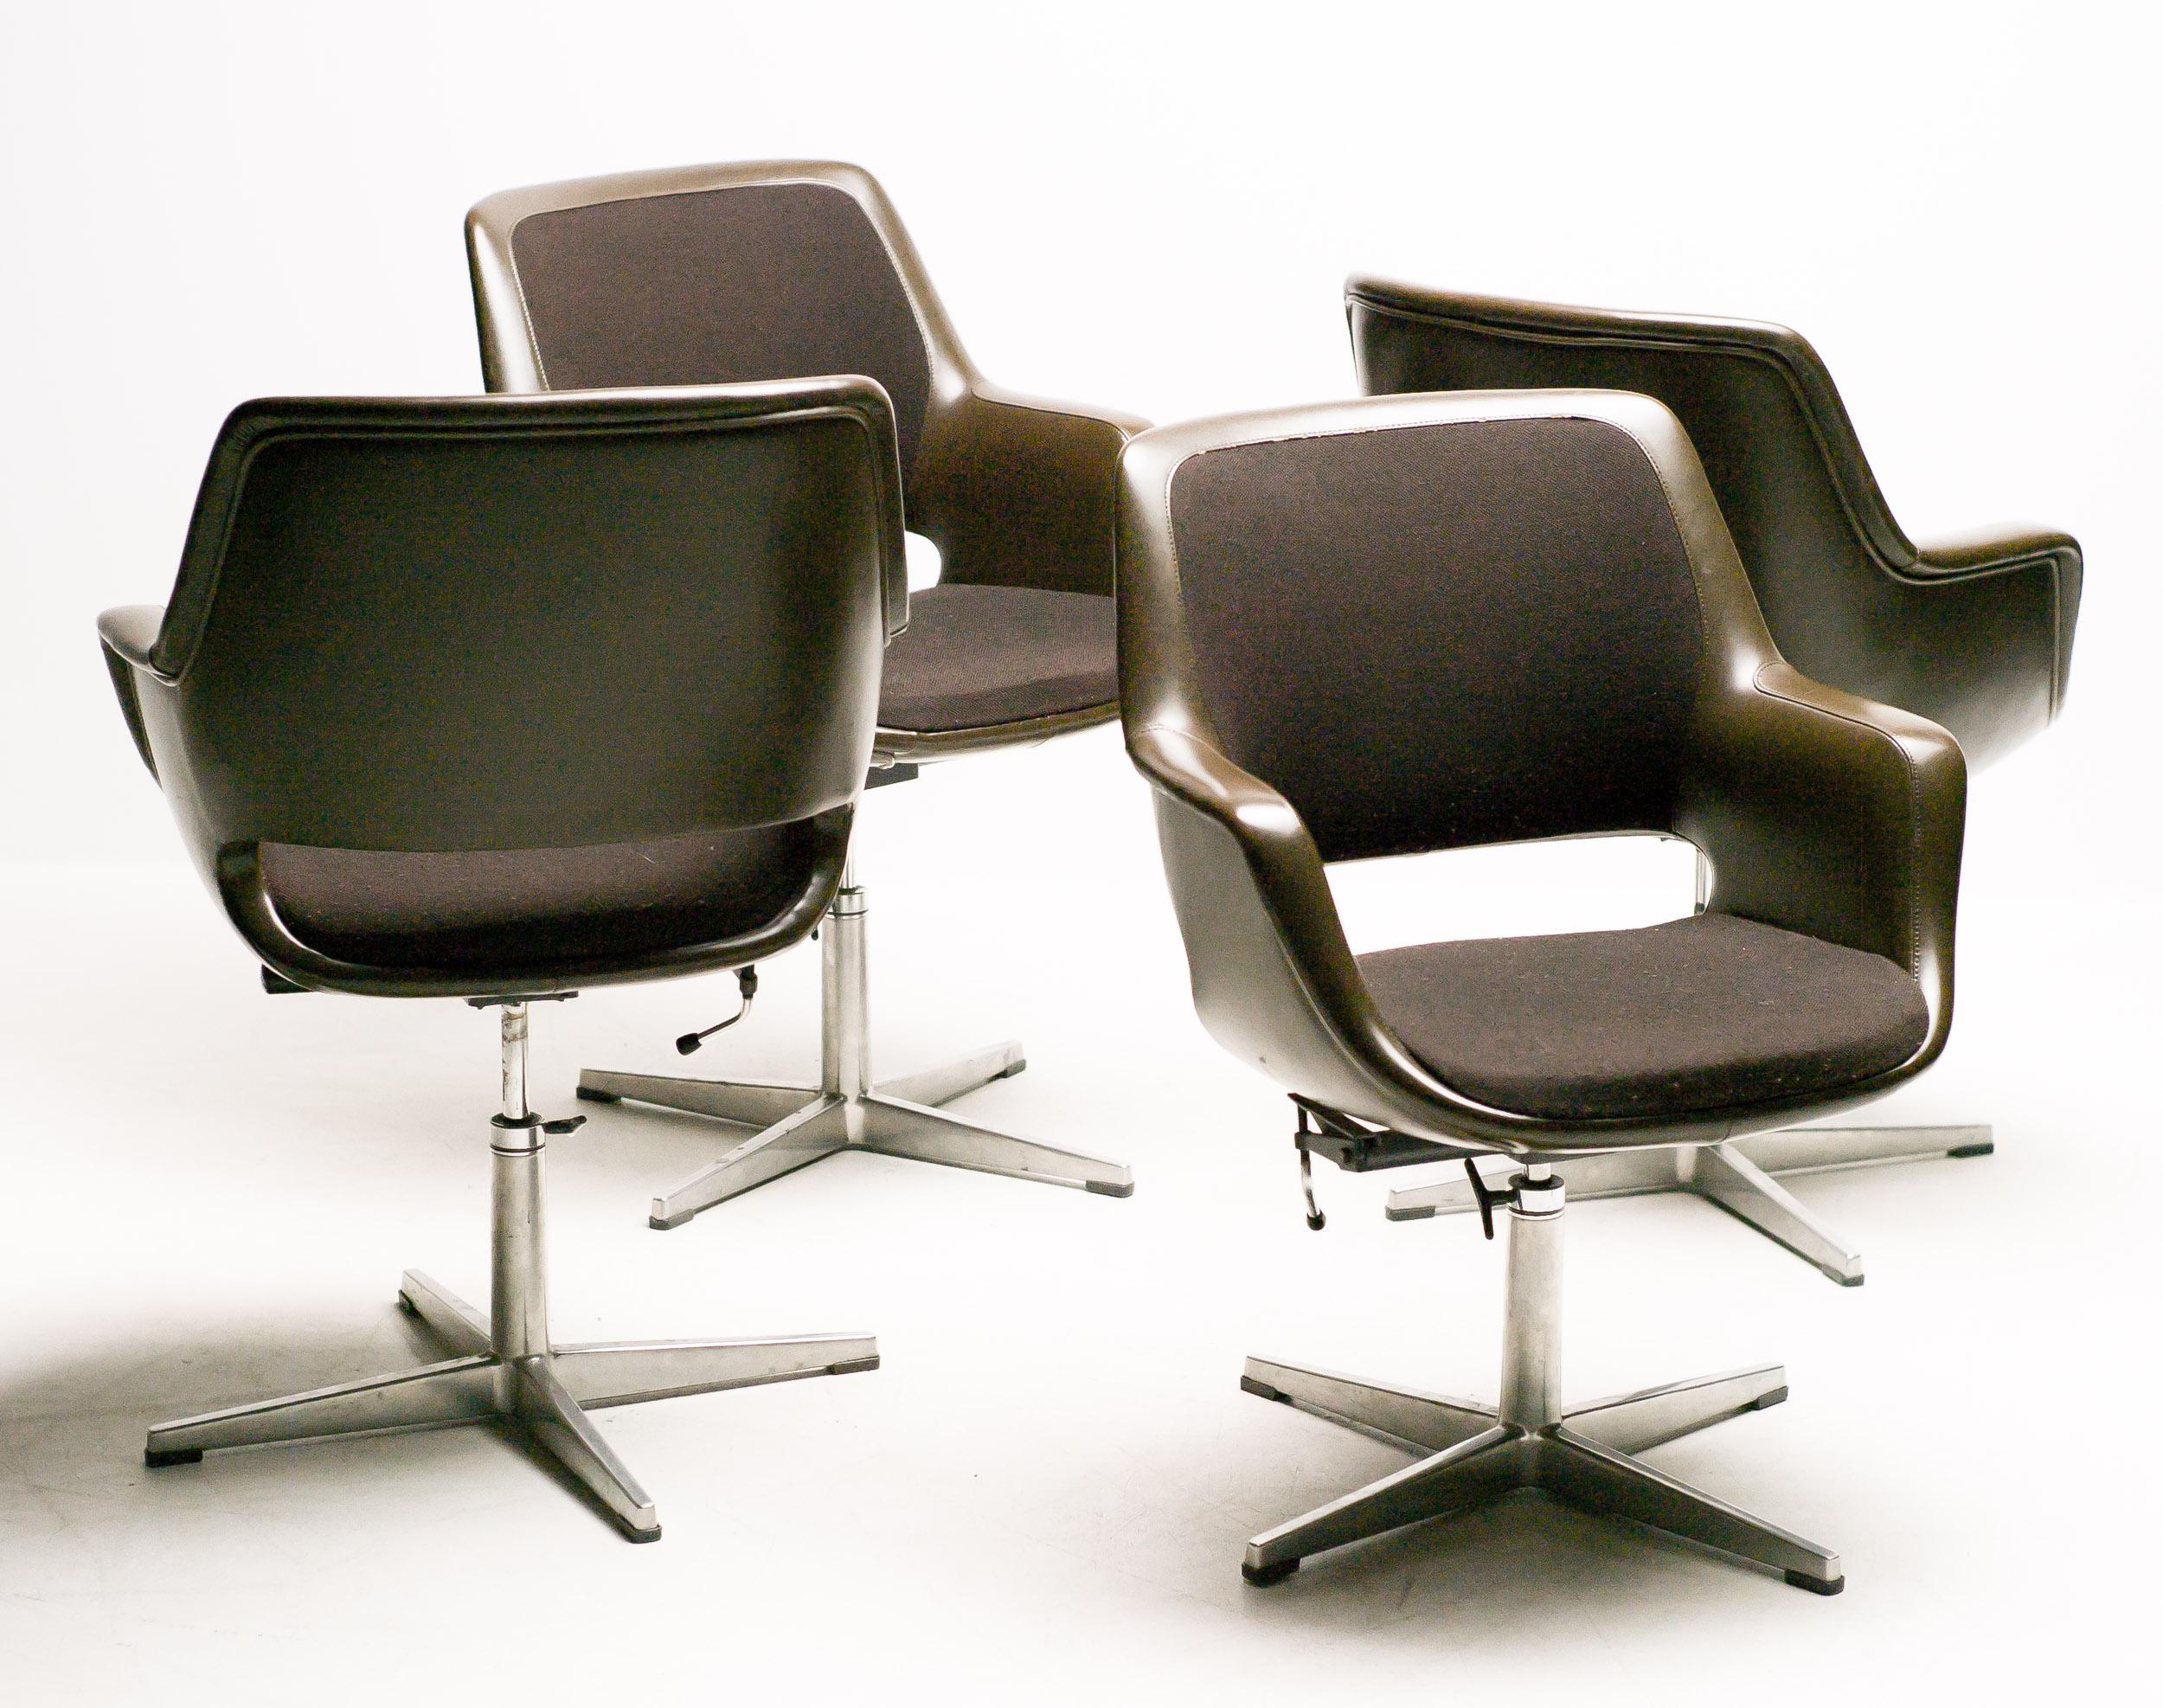 Mid-20th Century Set of Four Super Kilta Chairs by Olli Mannermaa for Finnart Ab